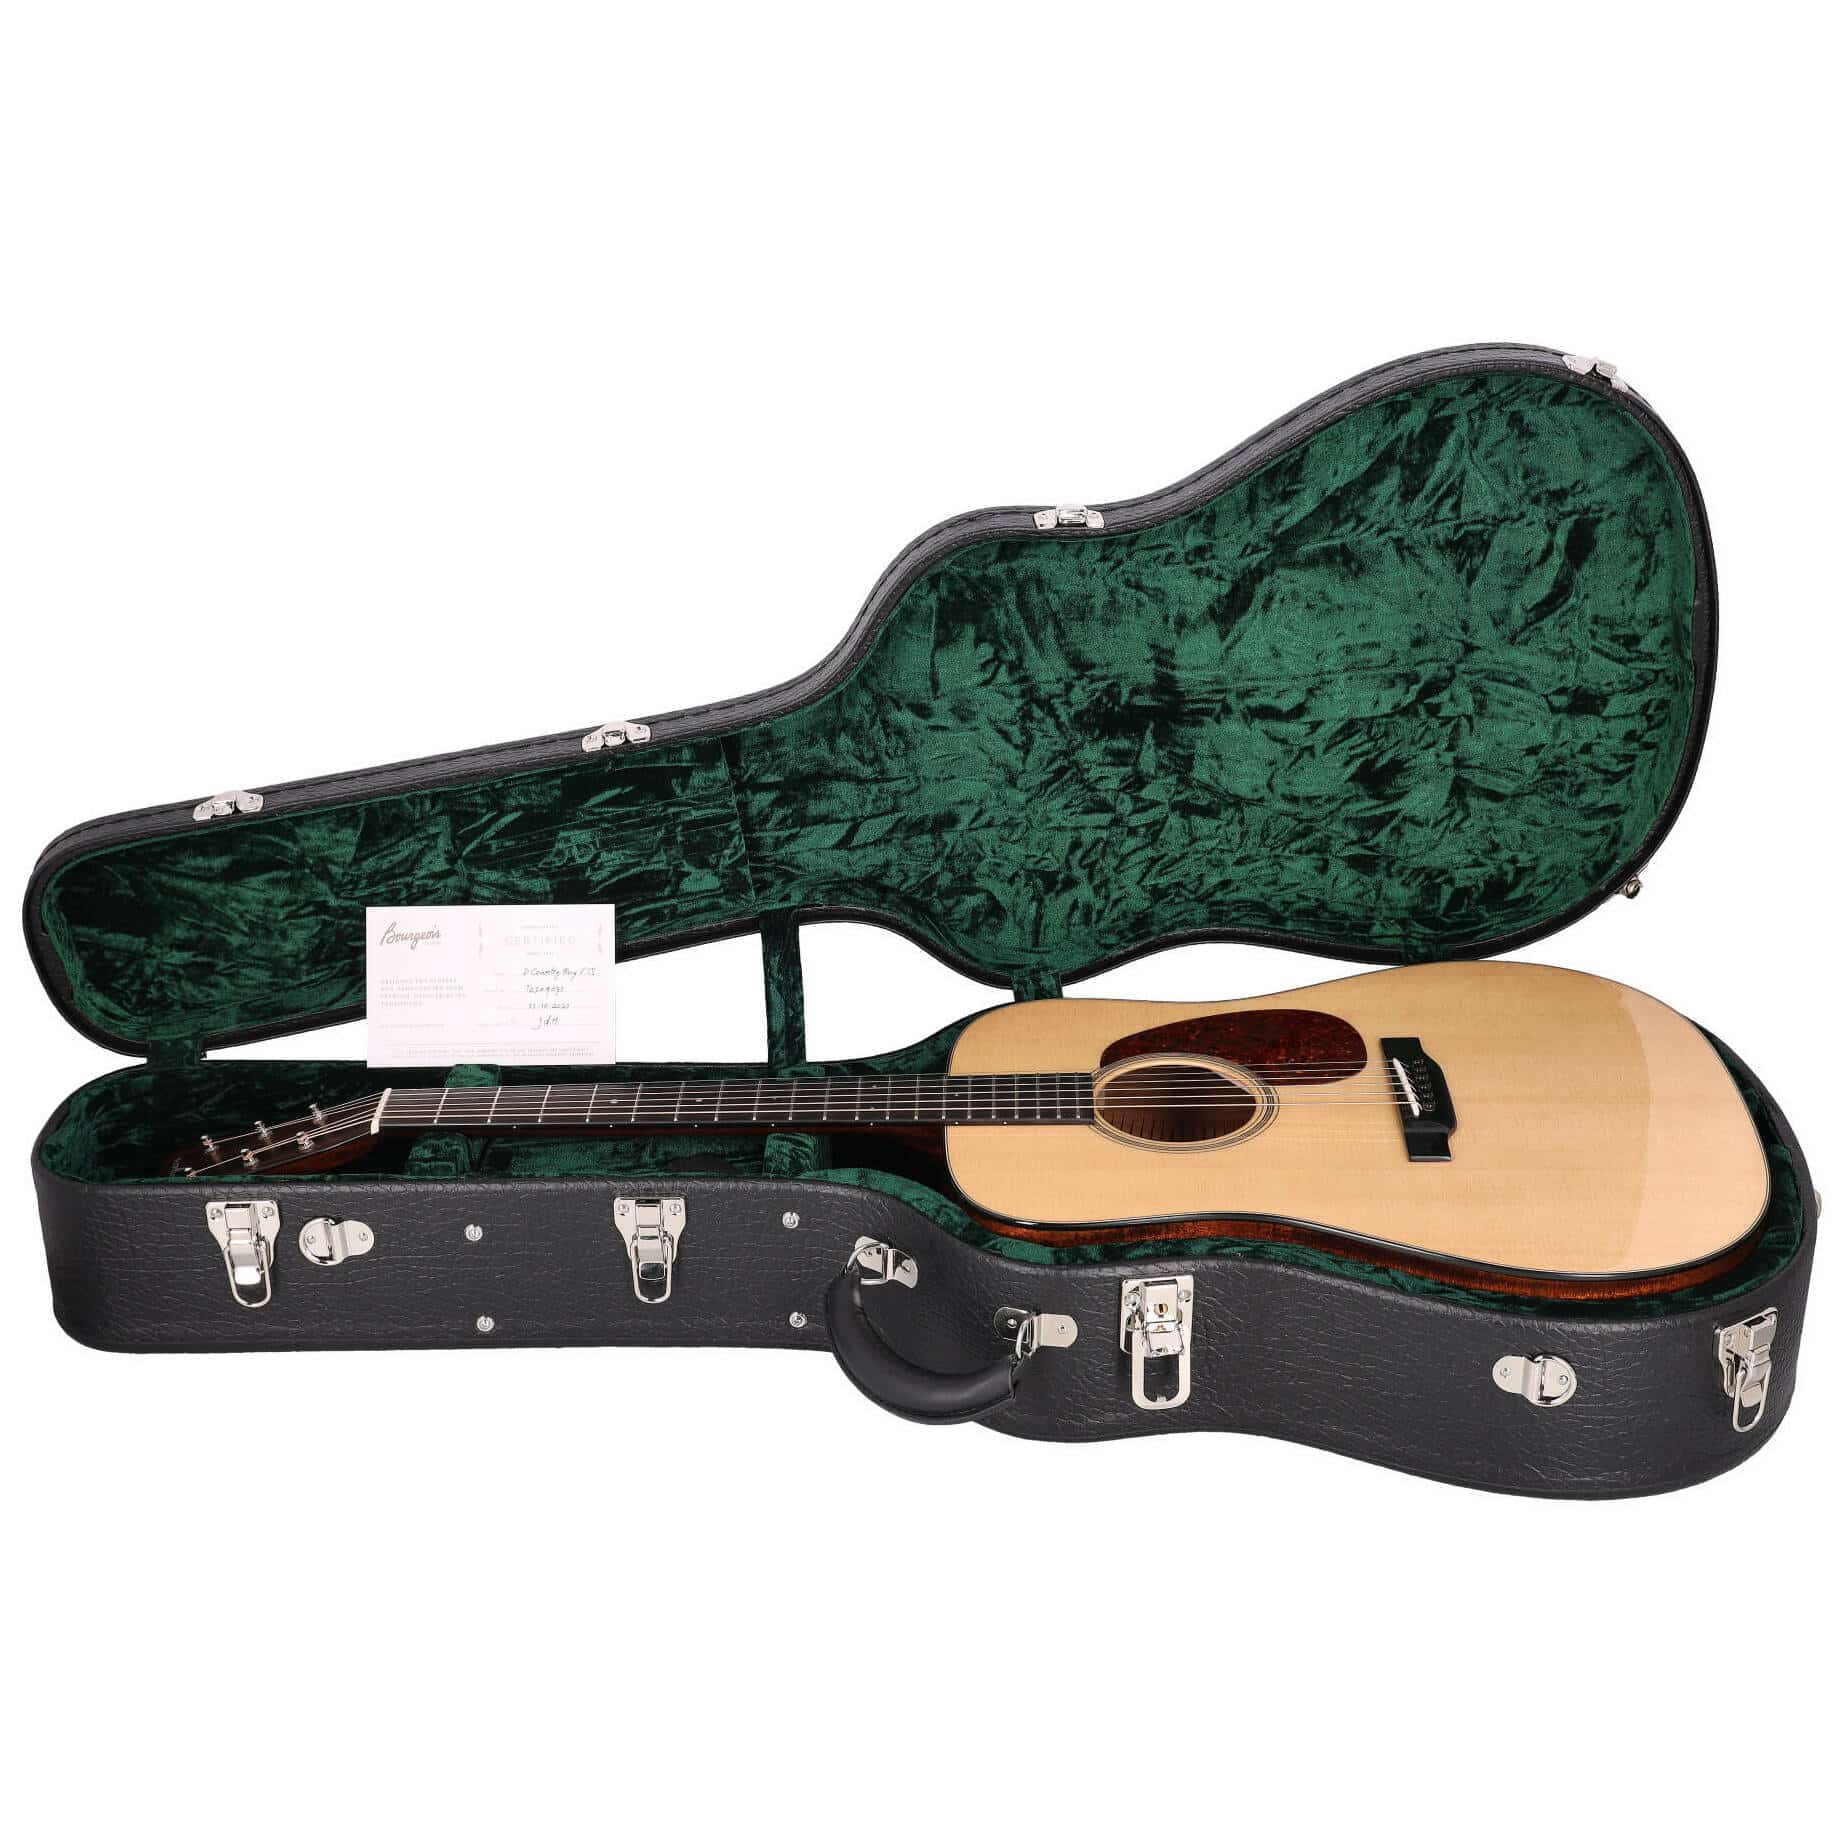 Bourgeois Guitars D CountryBoy Touchstone 16